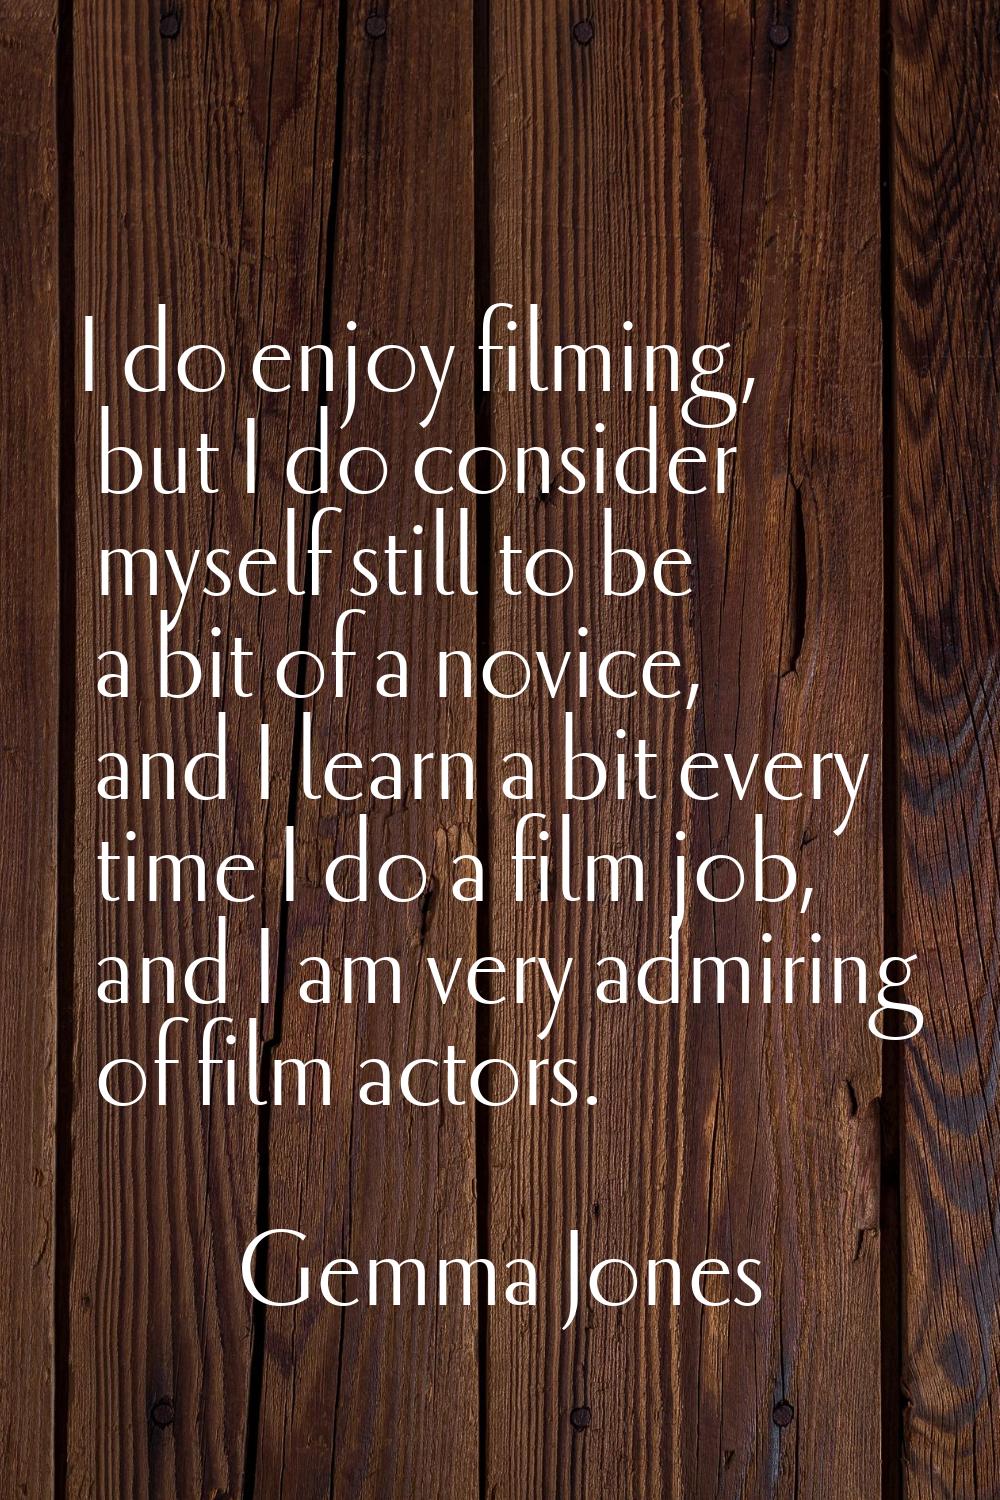 I do enjoy filming, but I do consider myself still to be a bit of a novice, and I learn a bit every